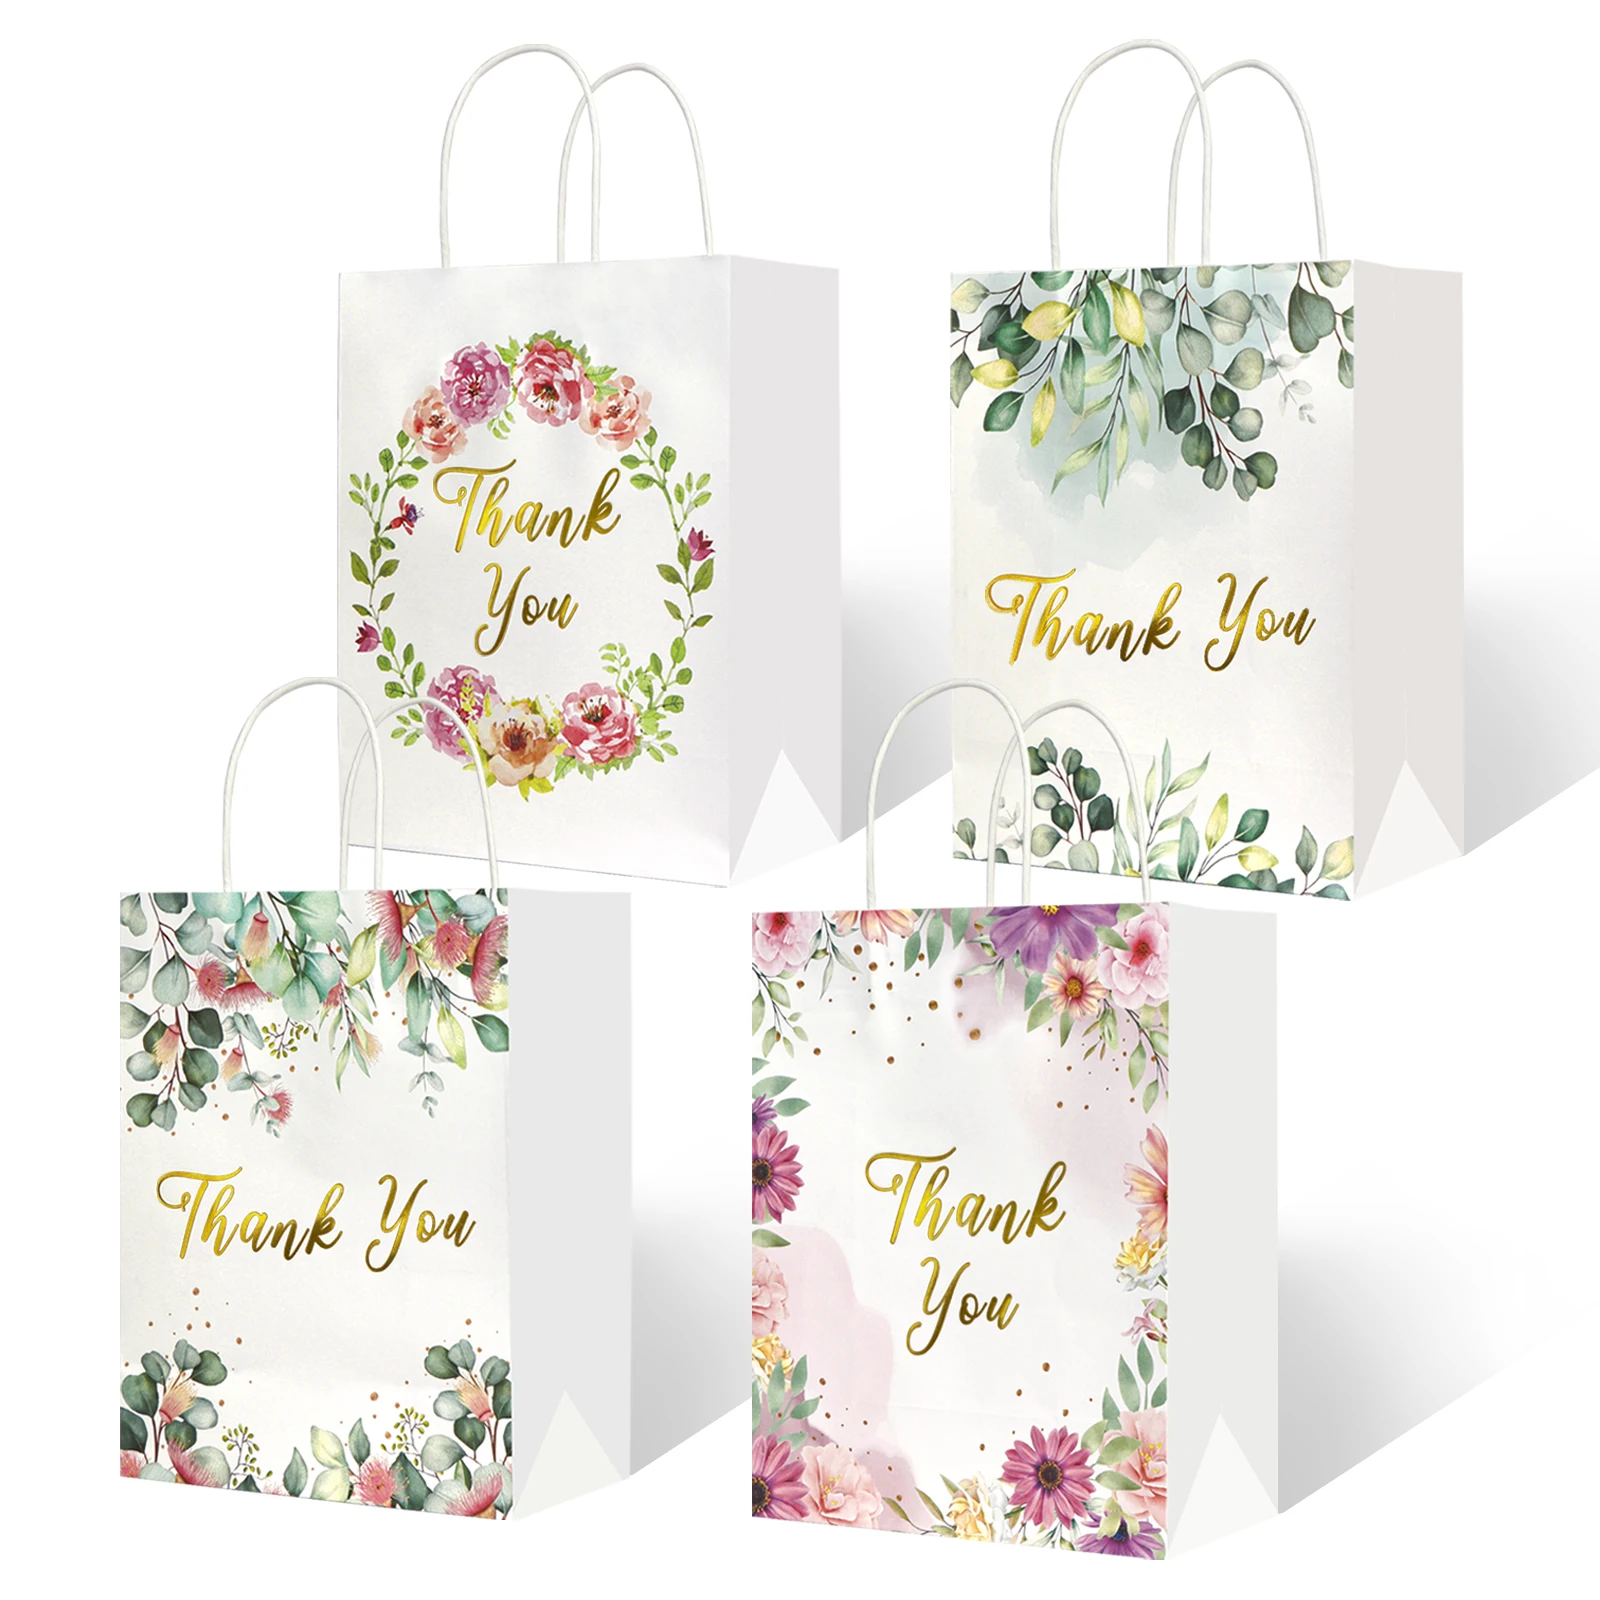 Medium Frosted Wedding Welcome Gift Bags, Wedding, Party Supplies, 12 Pcs, White